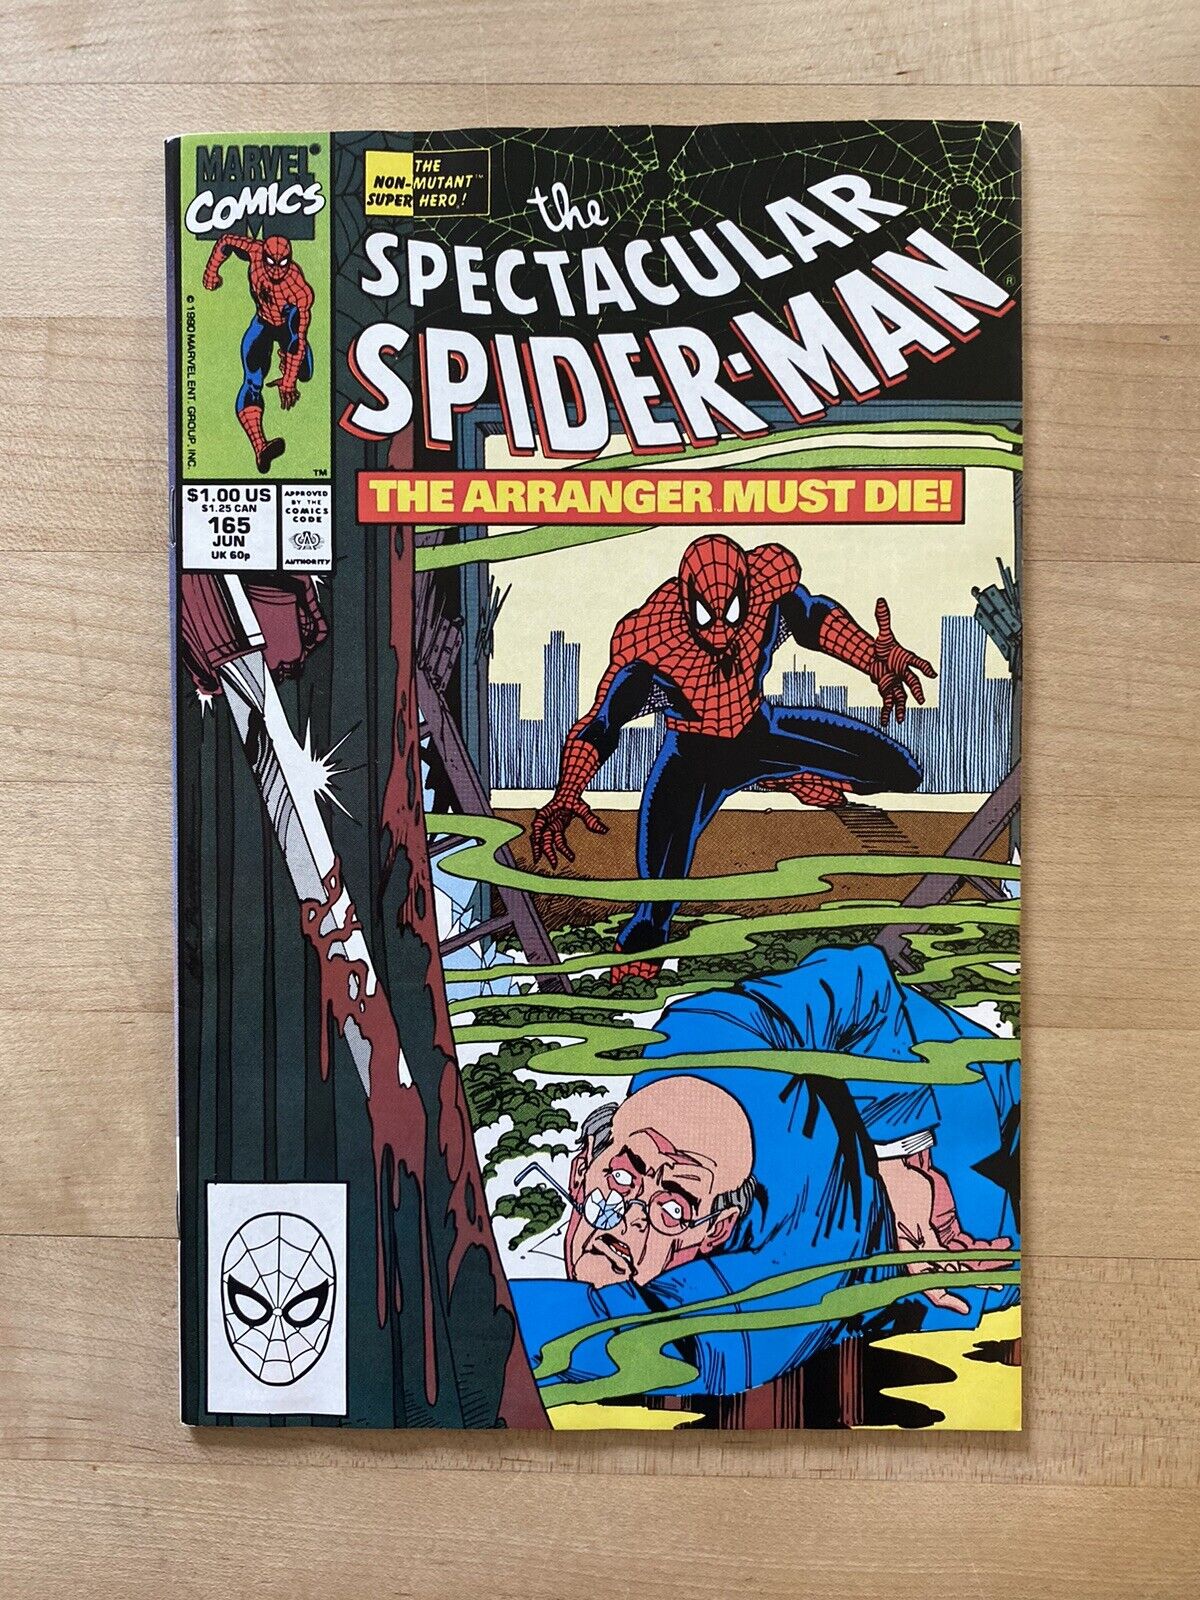 SPECTACULAR SPIDER-MAN #165 - 1ST KNIGHT AND FOGG, DEATH OF THE ARRANGER MARVEL